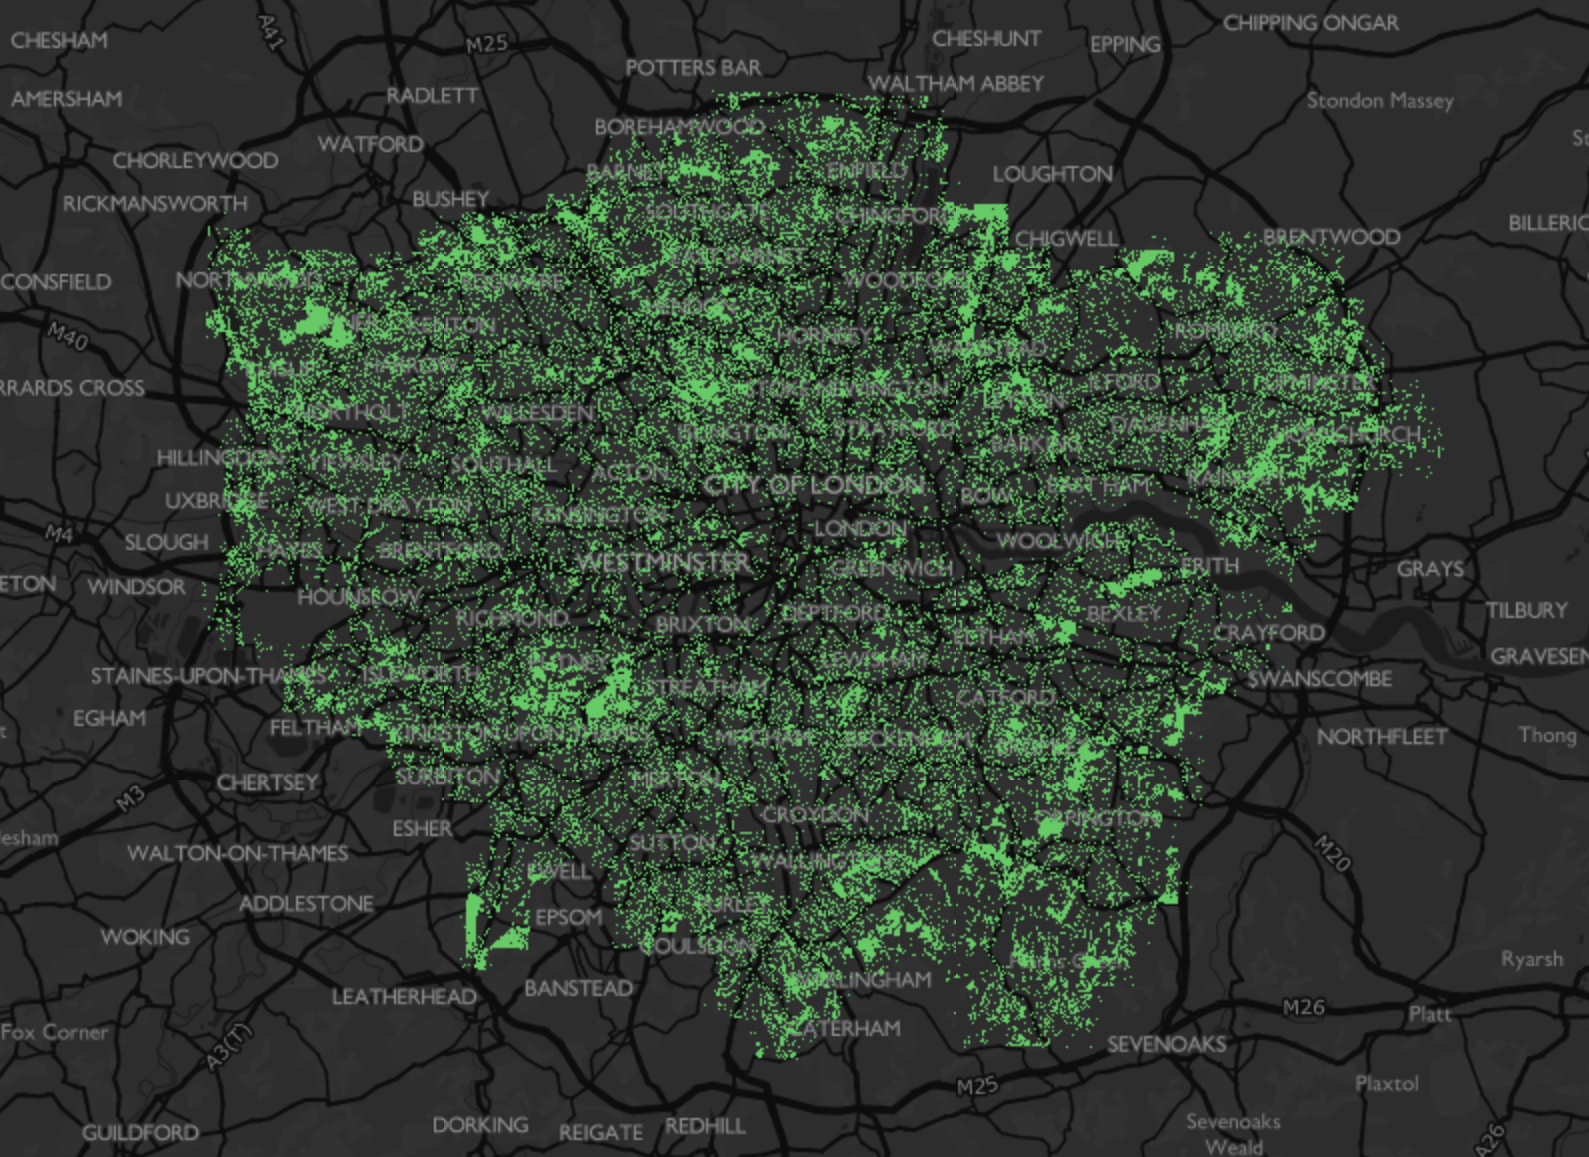 Map of tree cover in London